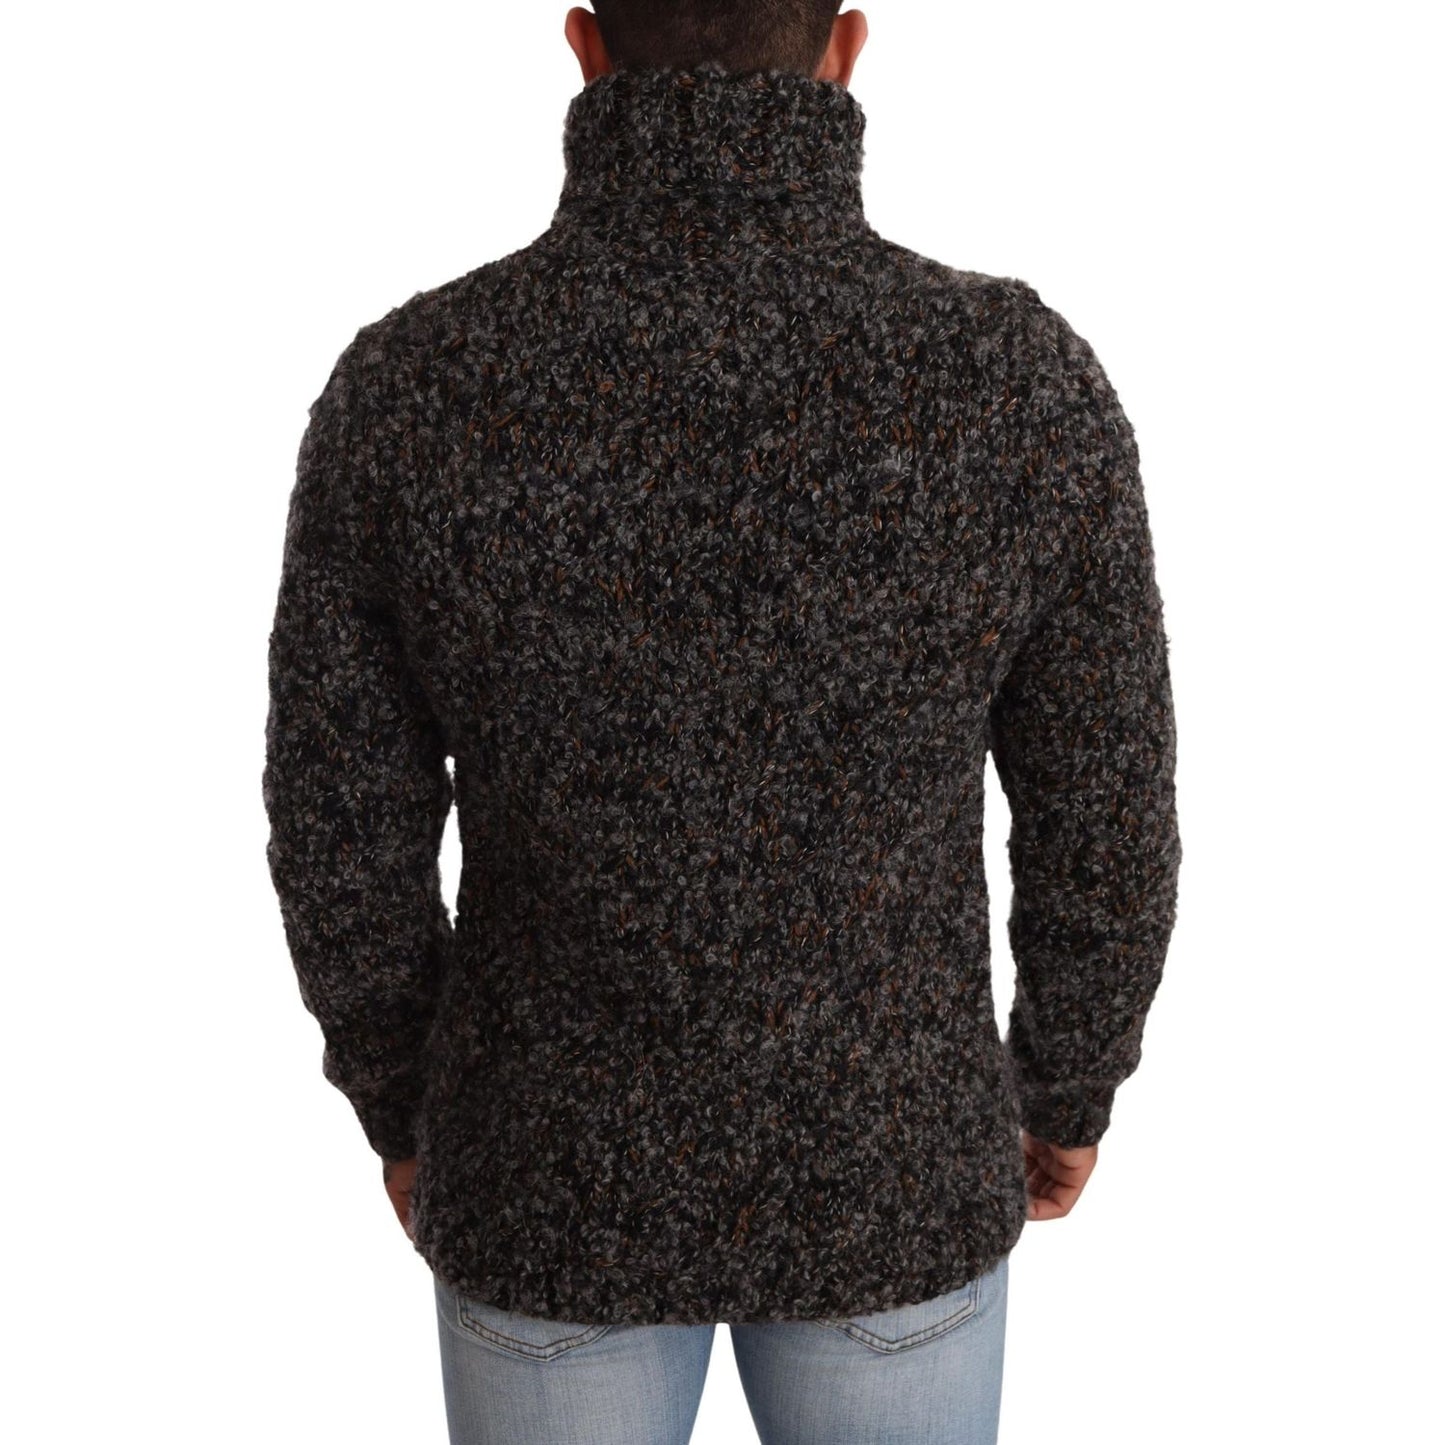 Dolce & Gabbana Elegant Speckled Turtleneck Wool-Blend Sweater MAN SWEATERS gray-wool-blend-turtleneck-pullover-sweater IMG_4849-scaled-bf372769-47a.jpg